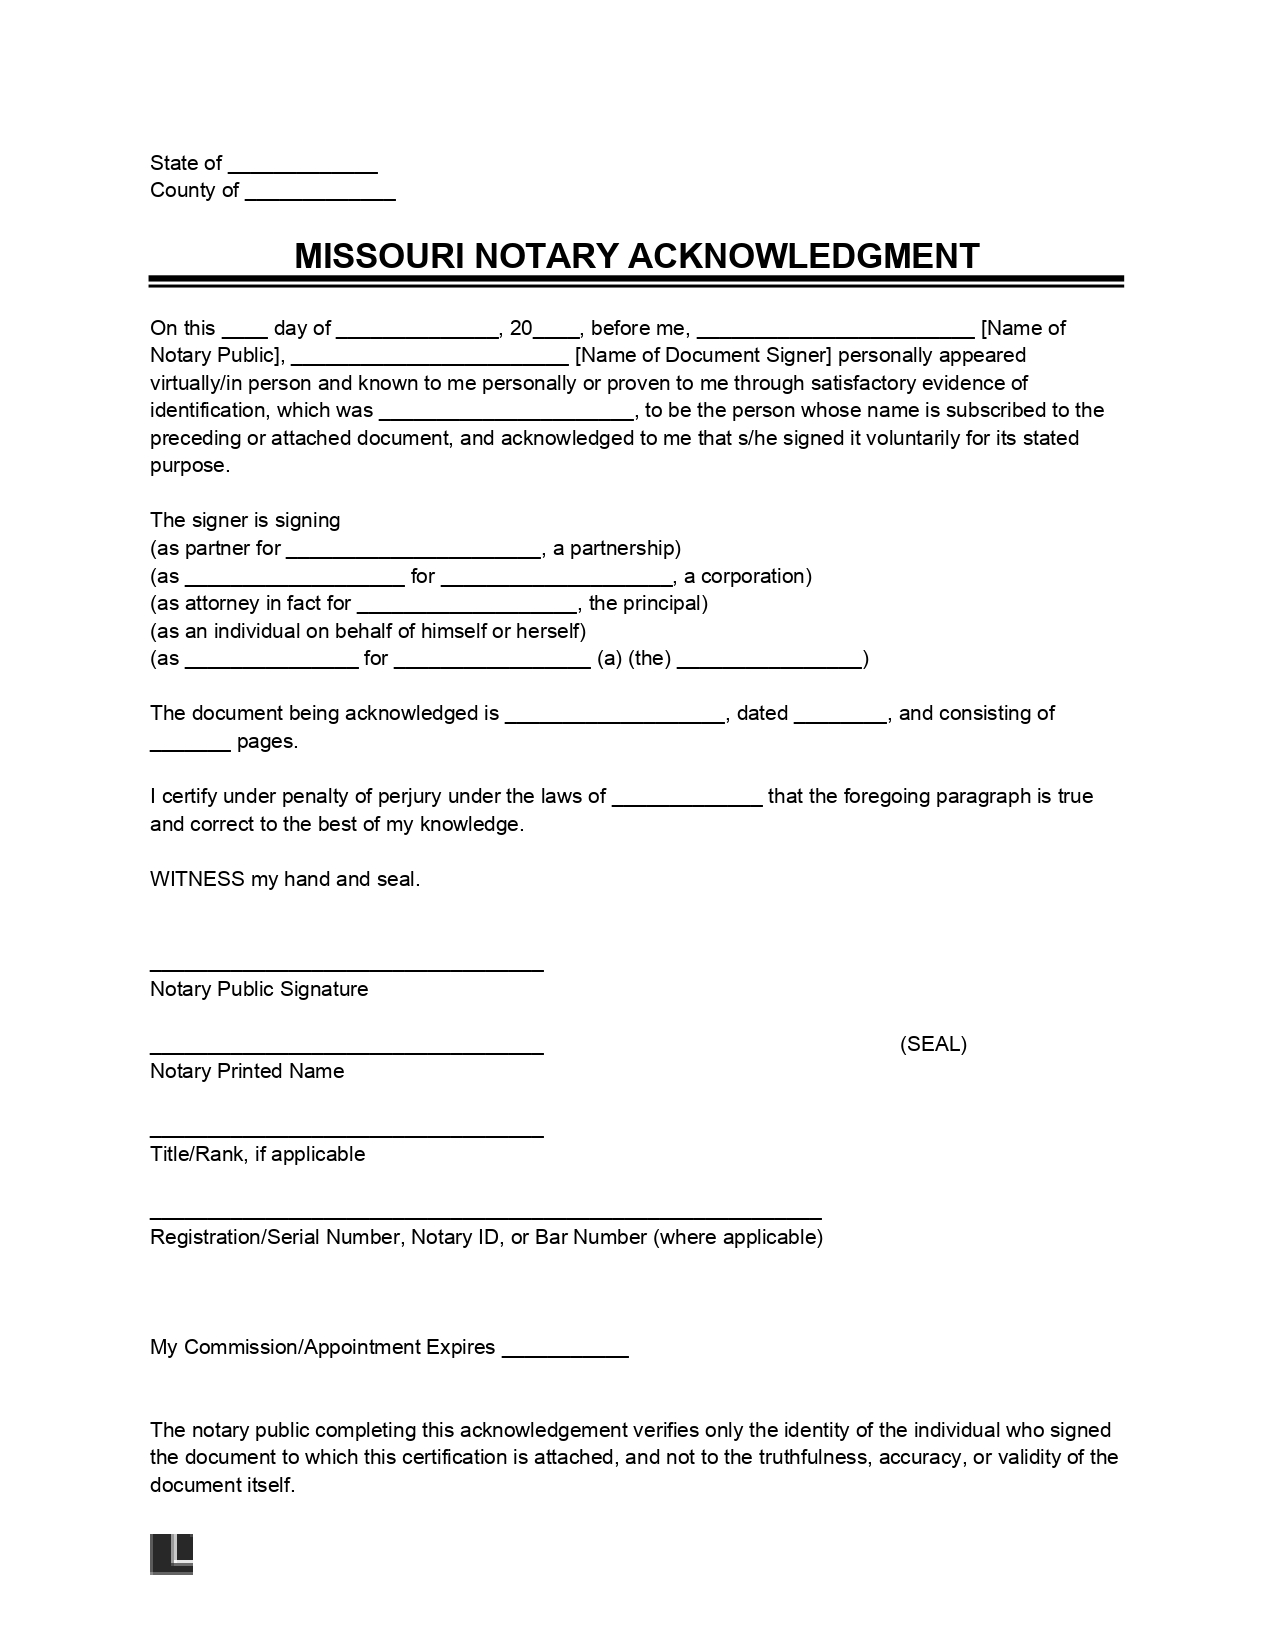 Missouri Notary Acknowledgment Form